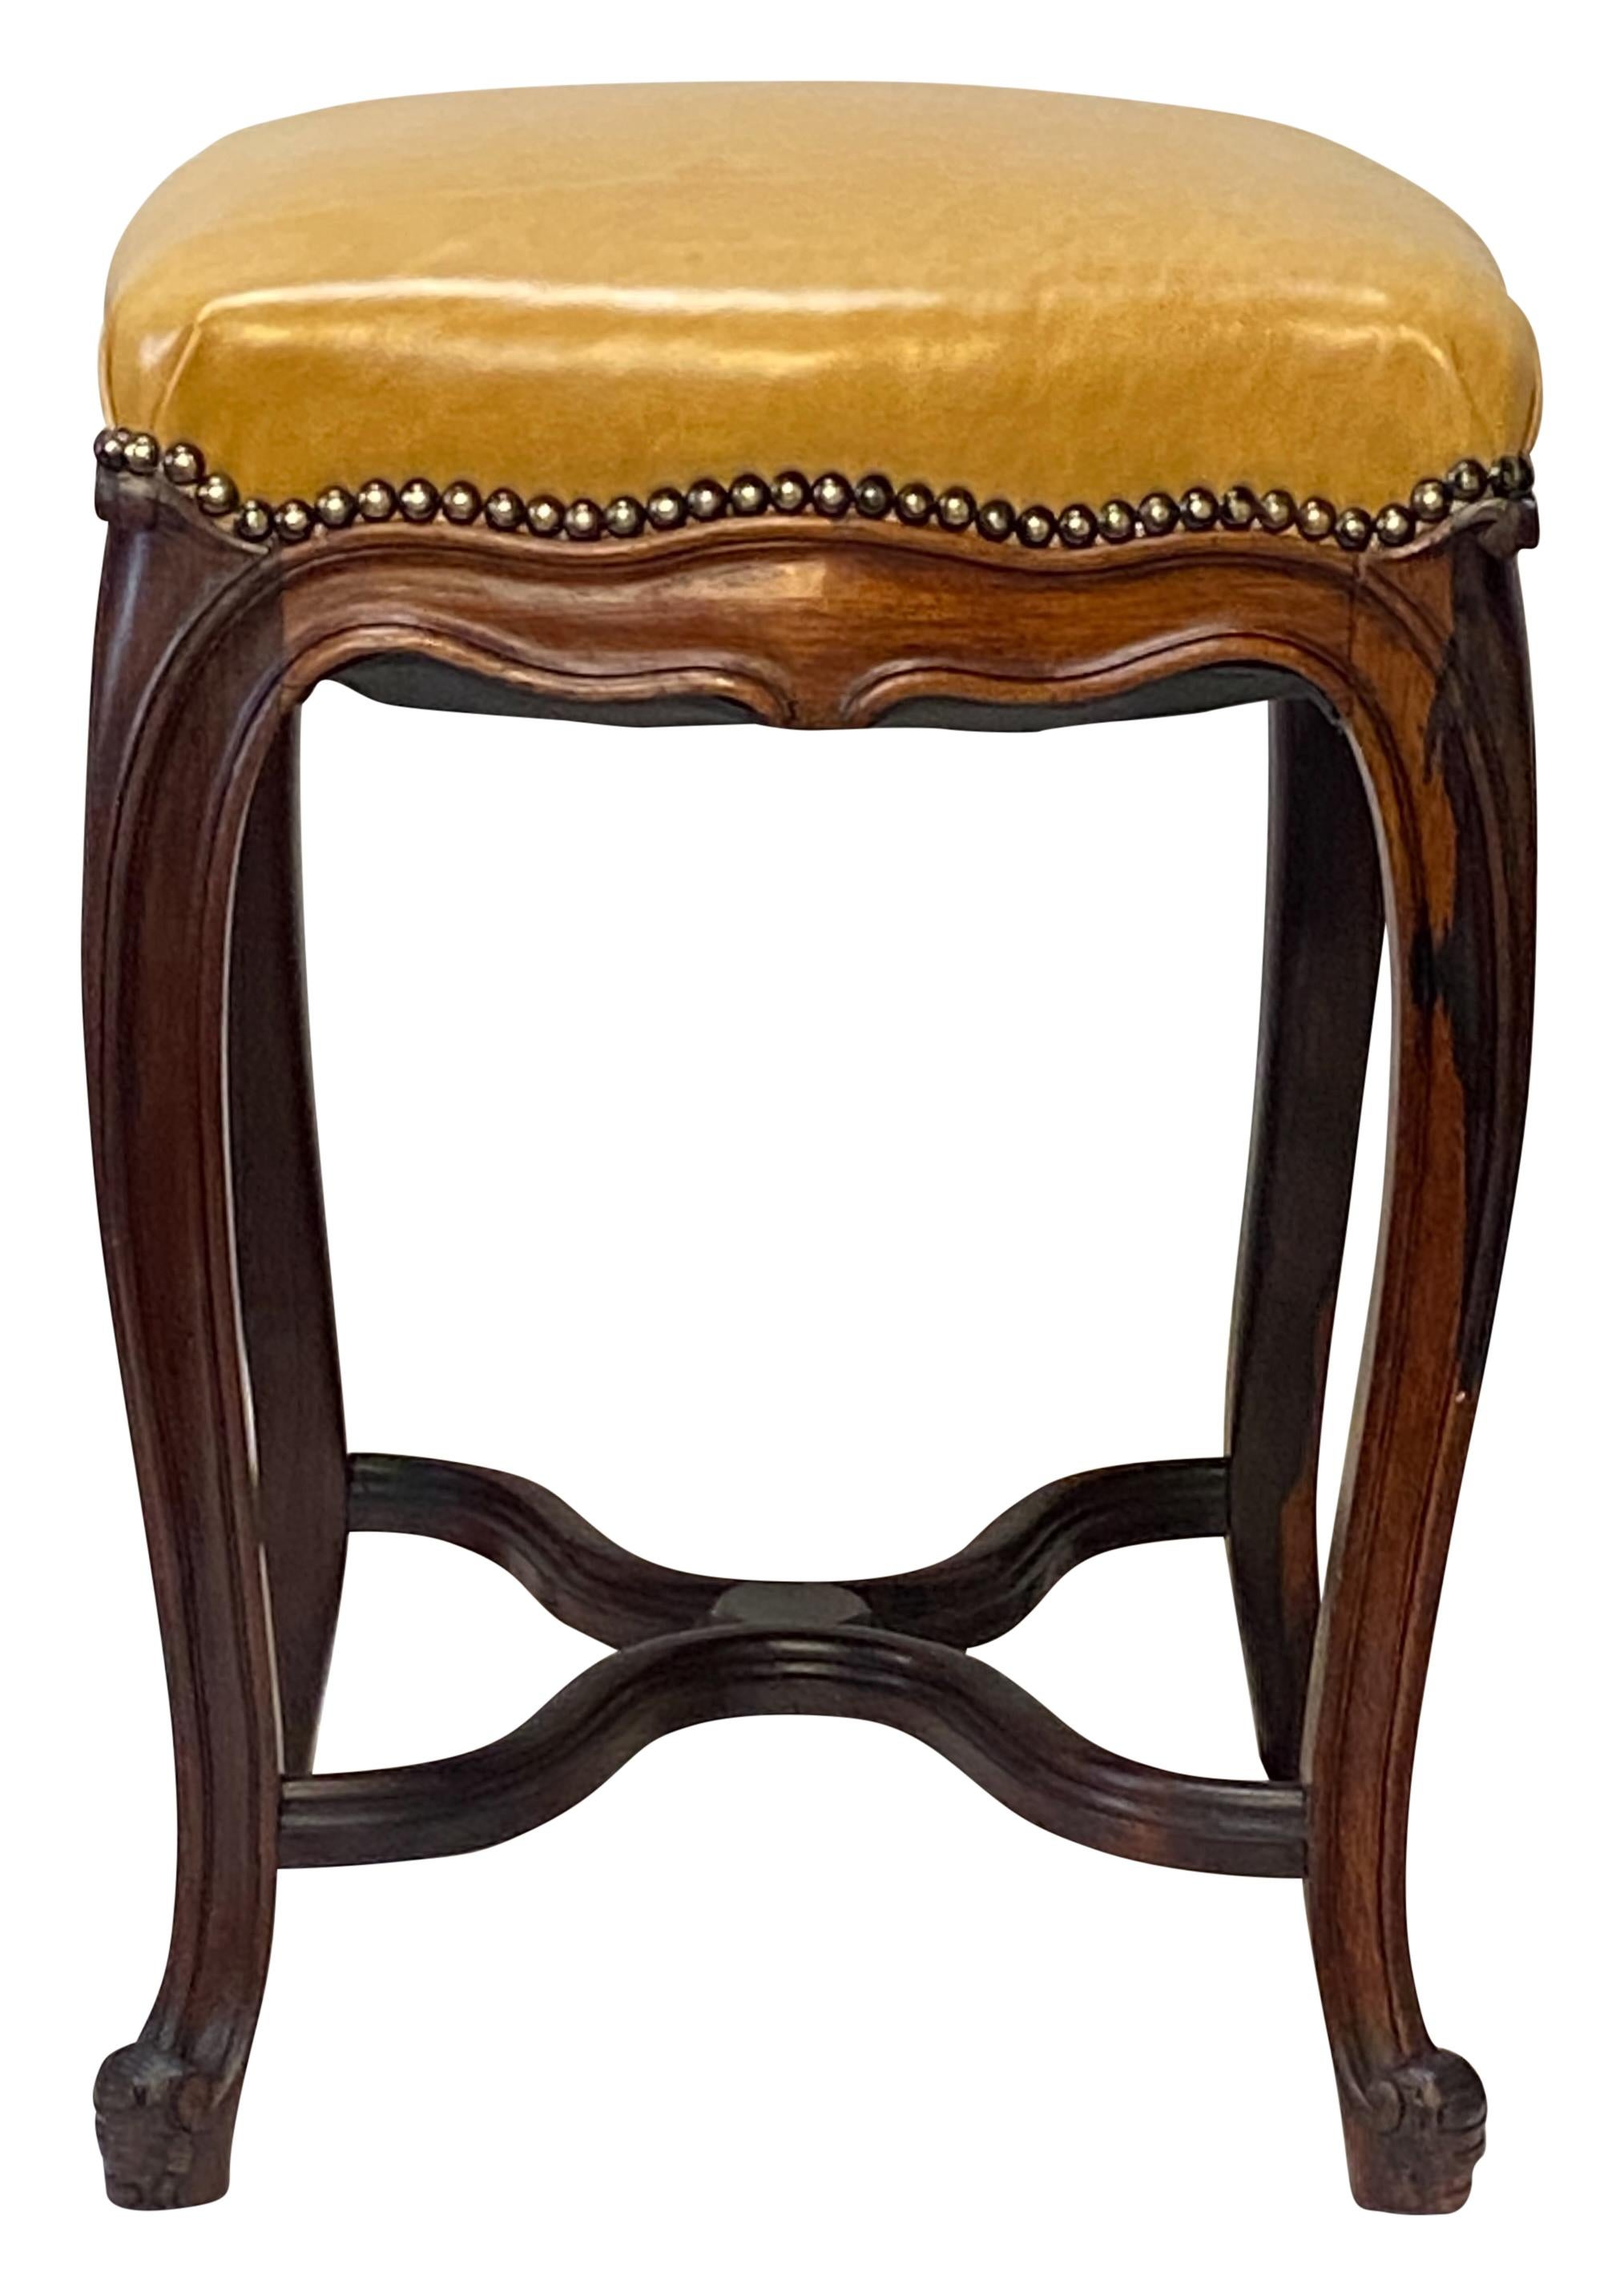 Carved Louis XV Style Rosewood and Leather Tabouret Stools, French 19th Century For Sale